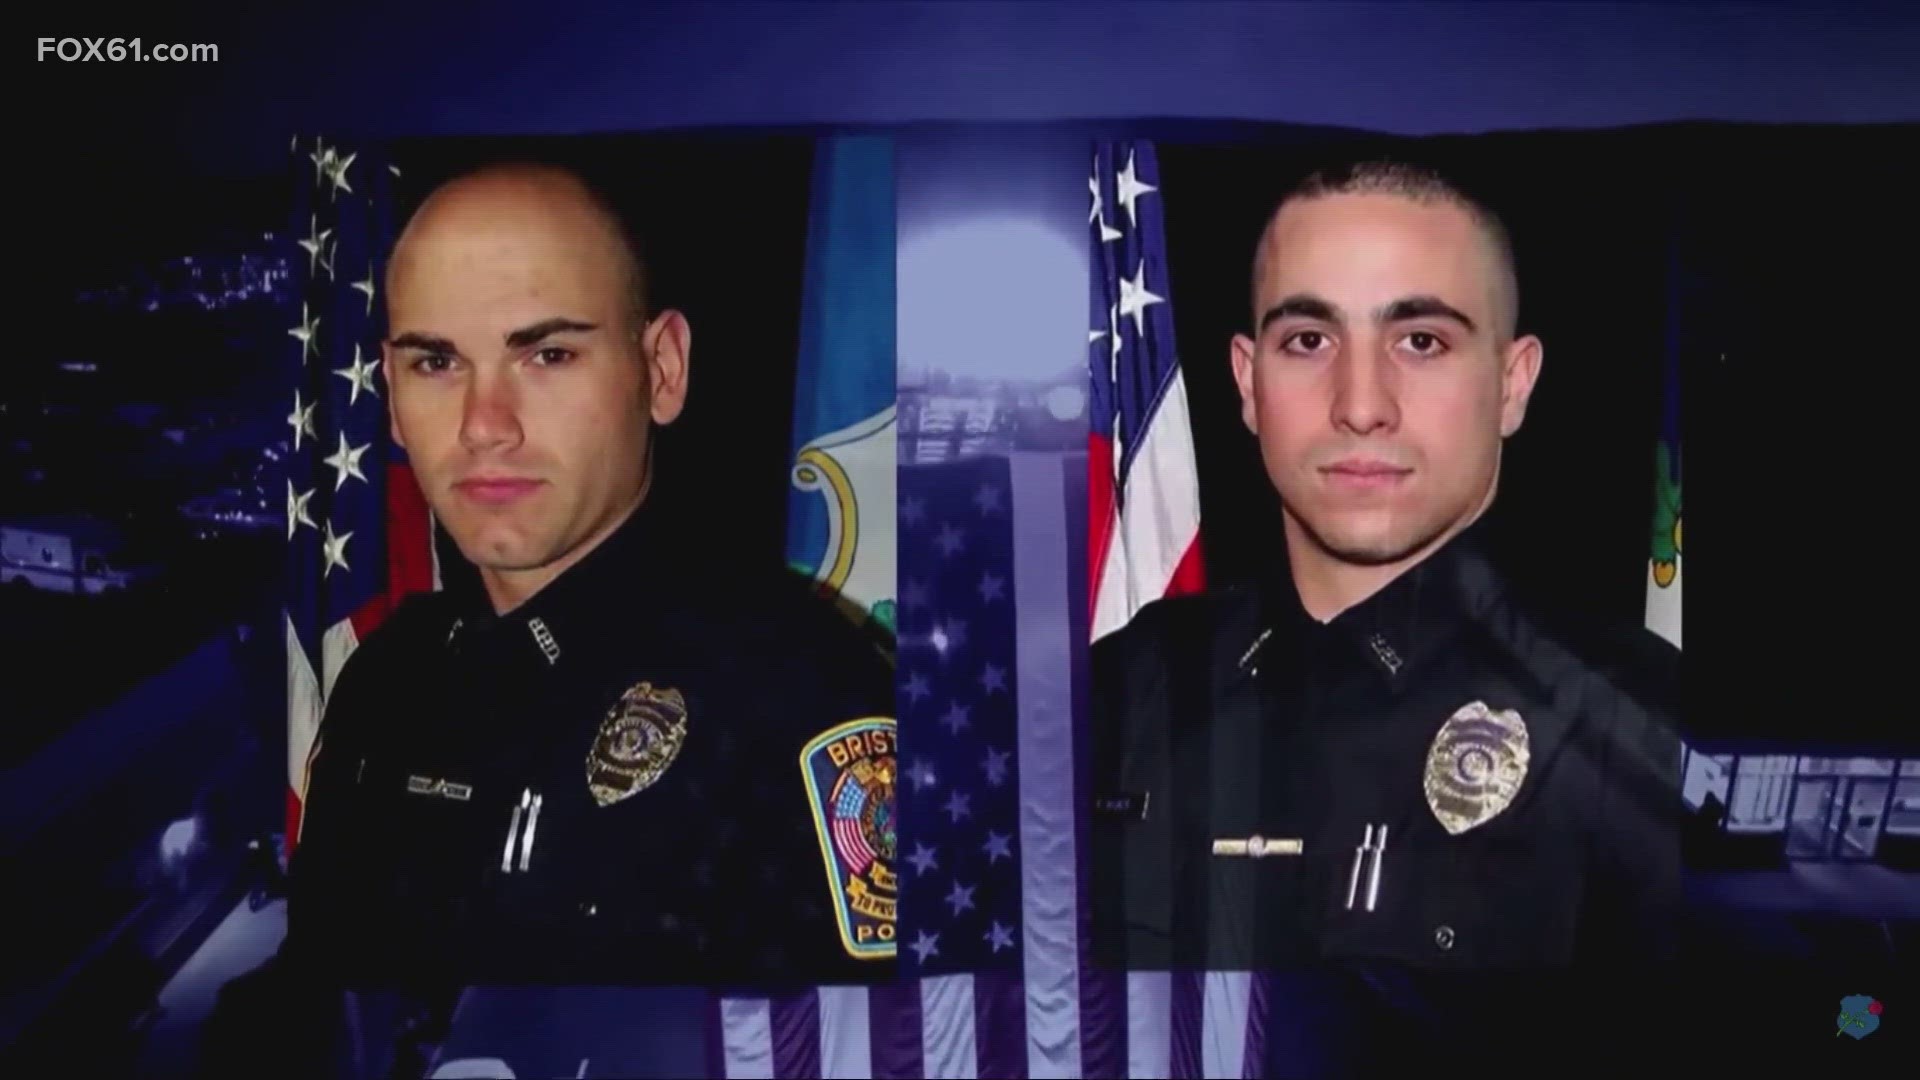 Thursday marked the one-year anniversary of Sgt. Alex Hamzy and Lt. Dustin DeMonte deaths, when they were killed in the line of duty.